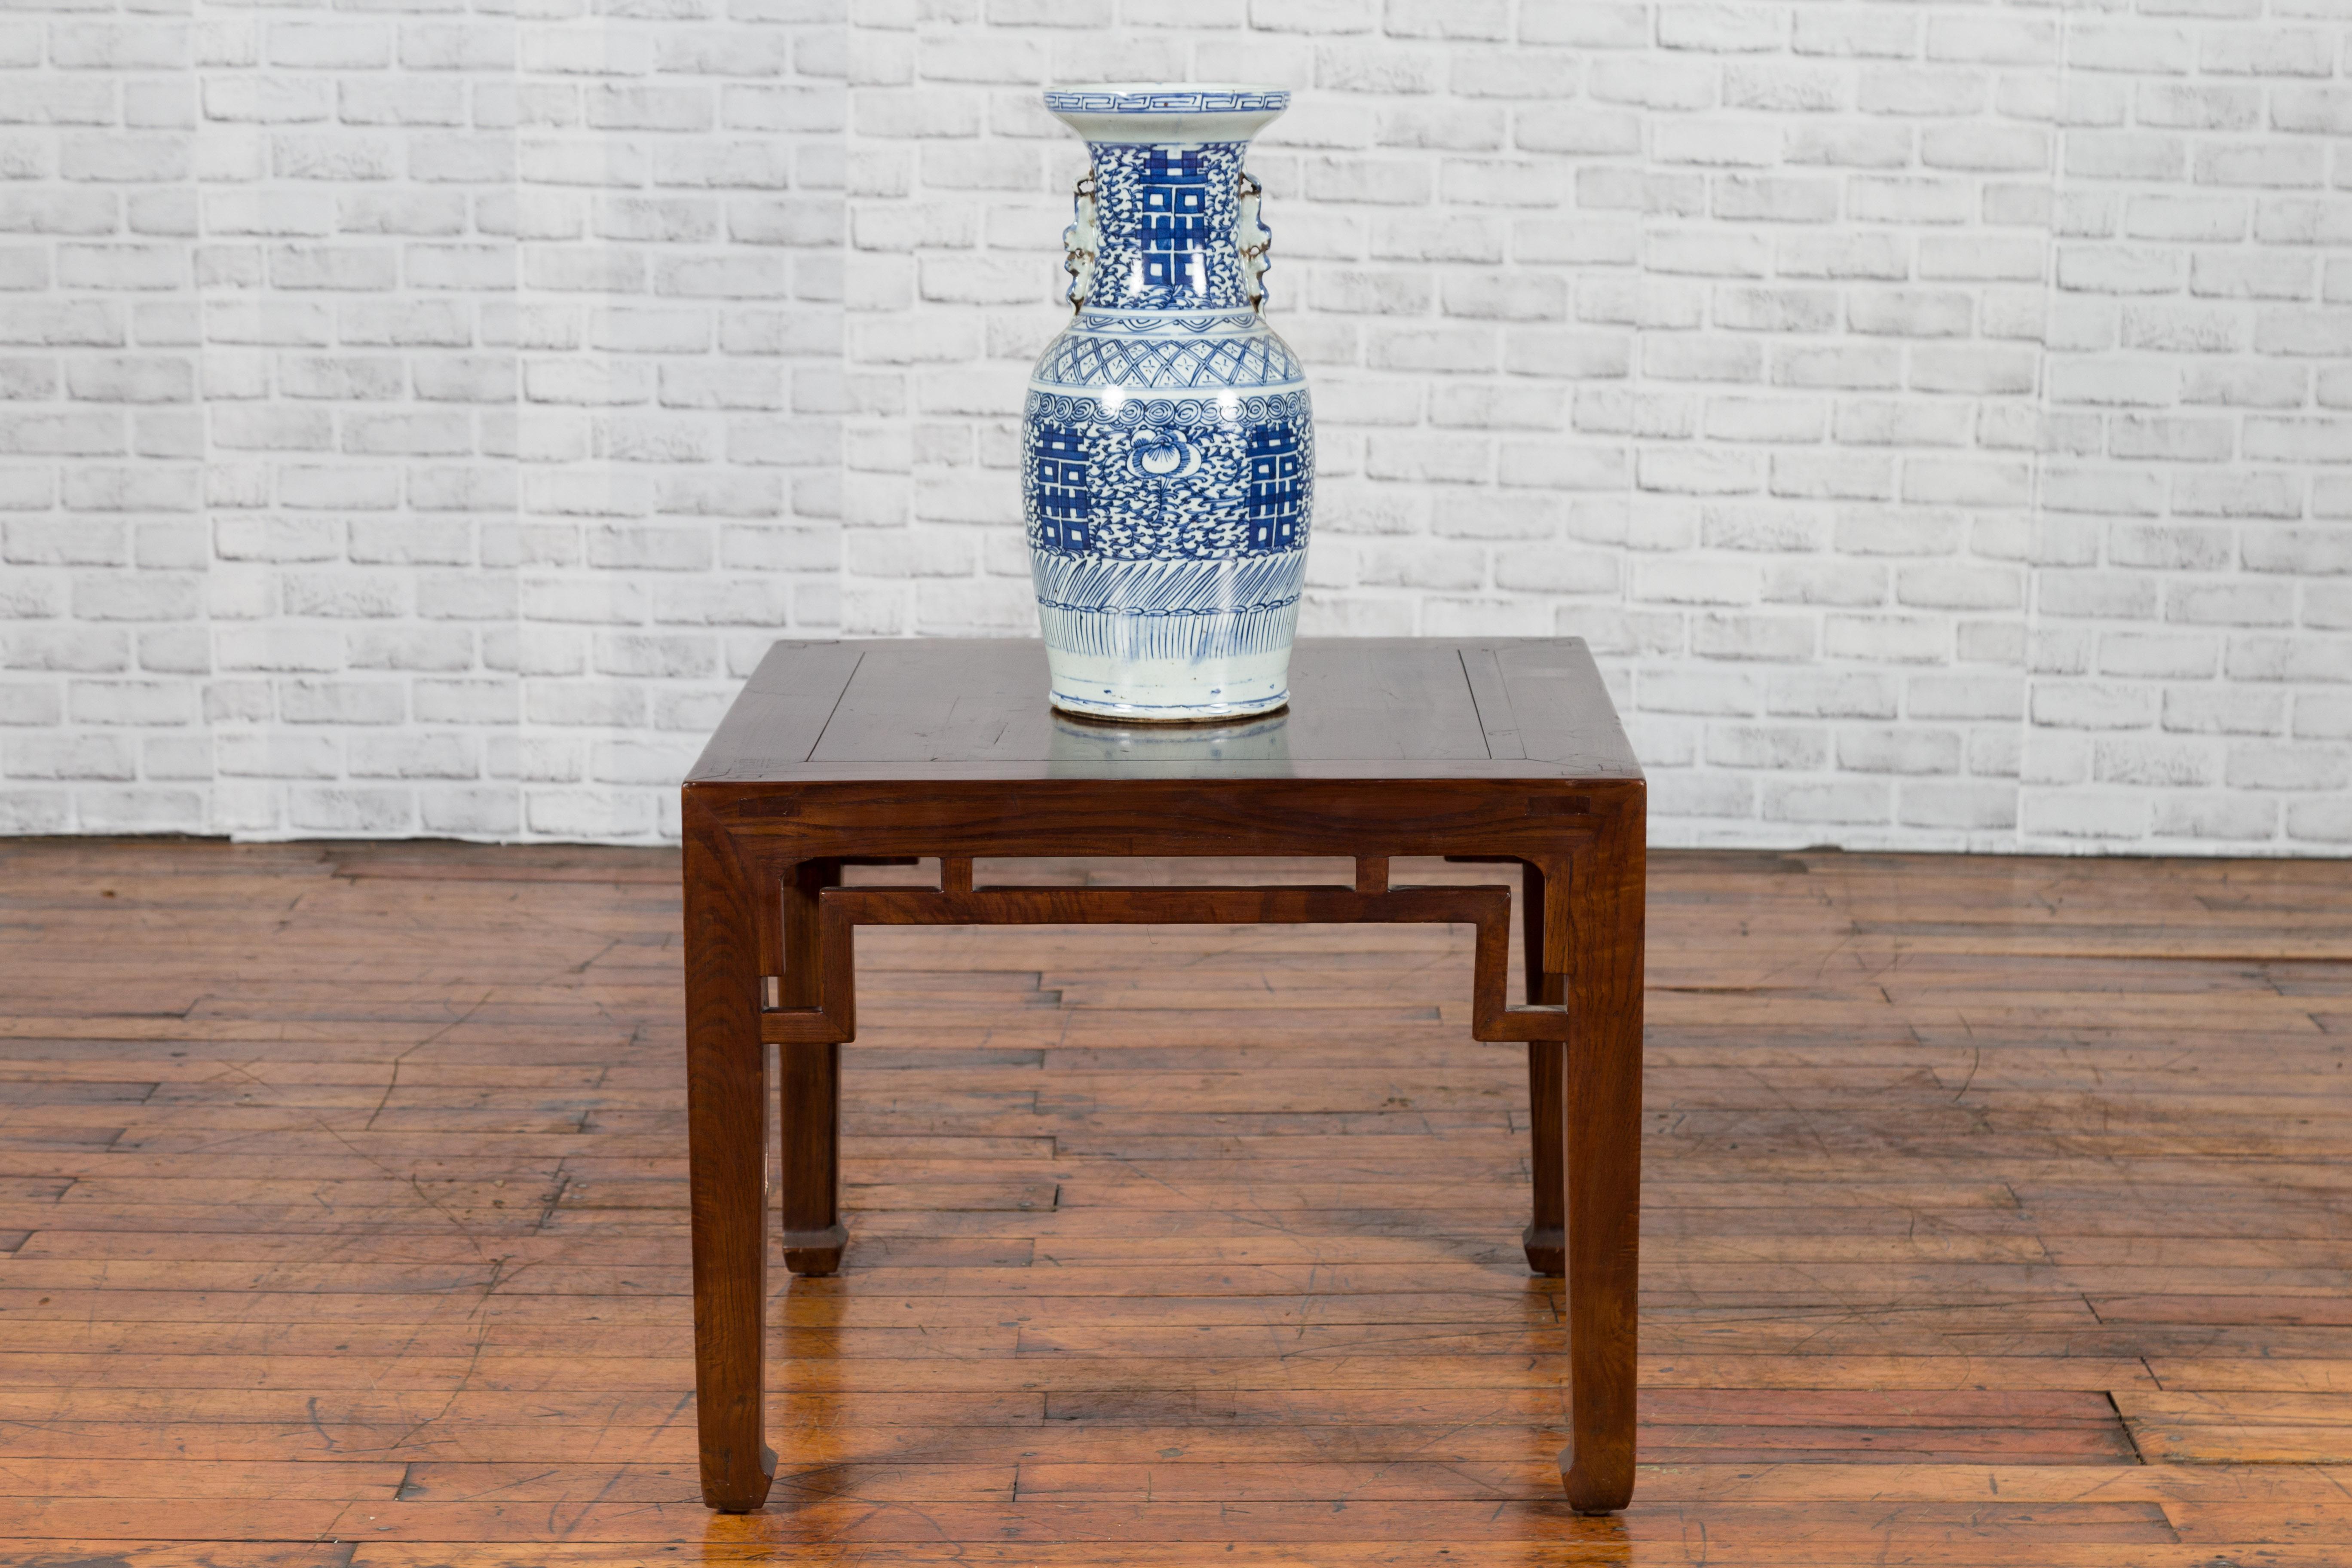 A Chinese Qing Dynasty period square-shaped side table from the 19th century, with horsehoof extremities. We currently have two available, priced and sold $1,500 each. Created in China during the Qing Dynasty, this side table features a